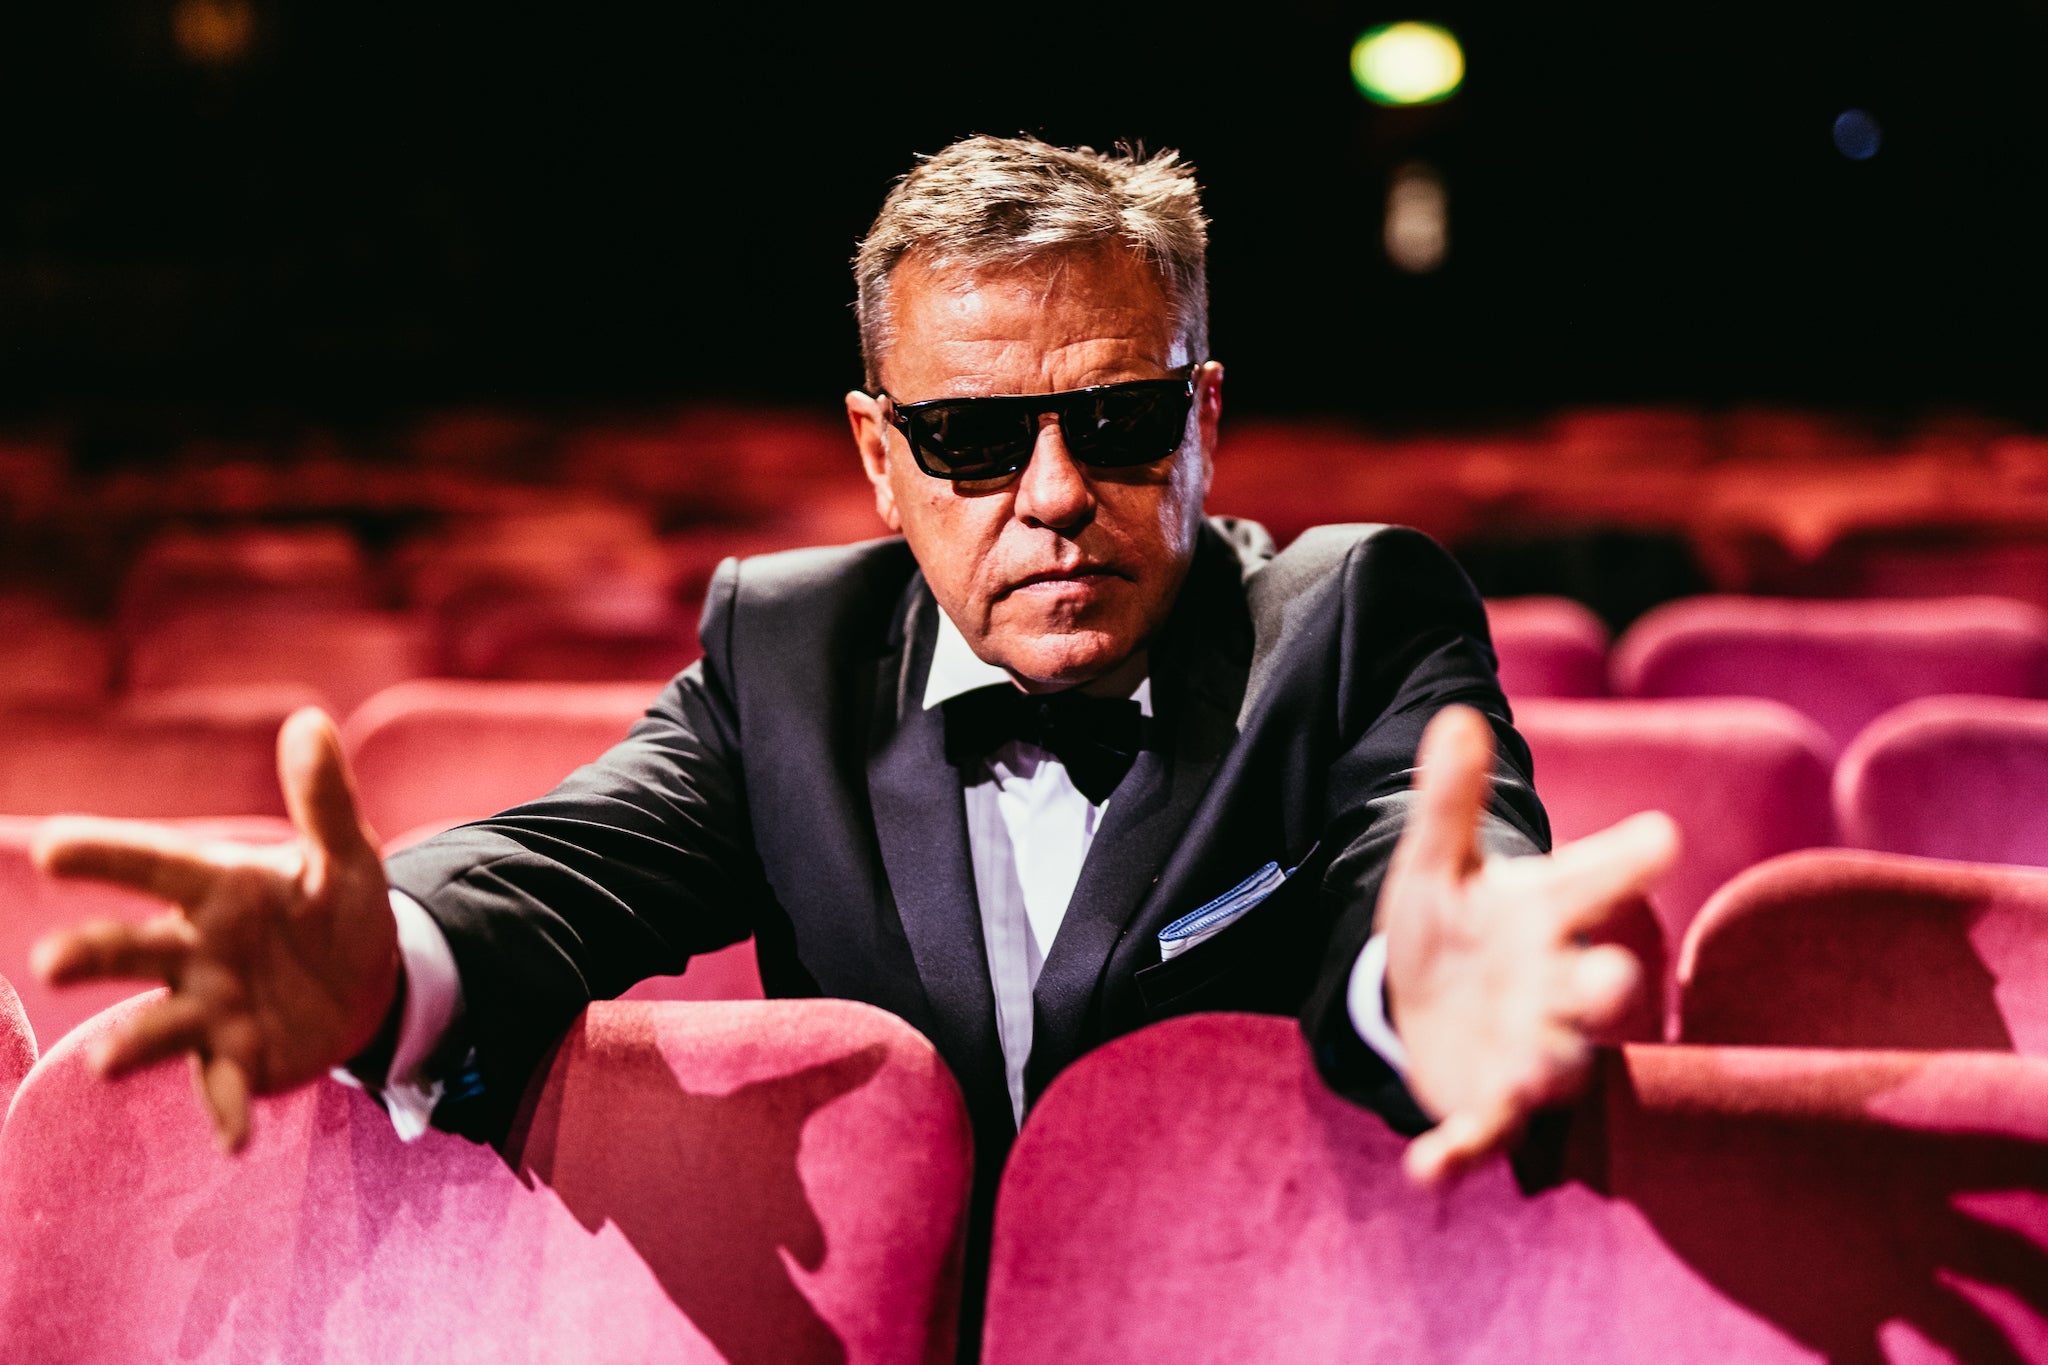 With tracks like ‘My Girl’ and ‘Our House’, Suggs and Madness made music that became a cultural shorthand for Britain